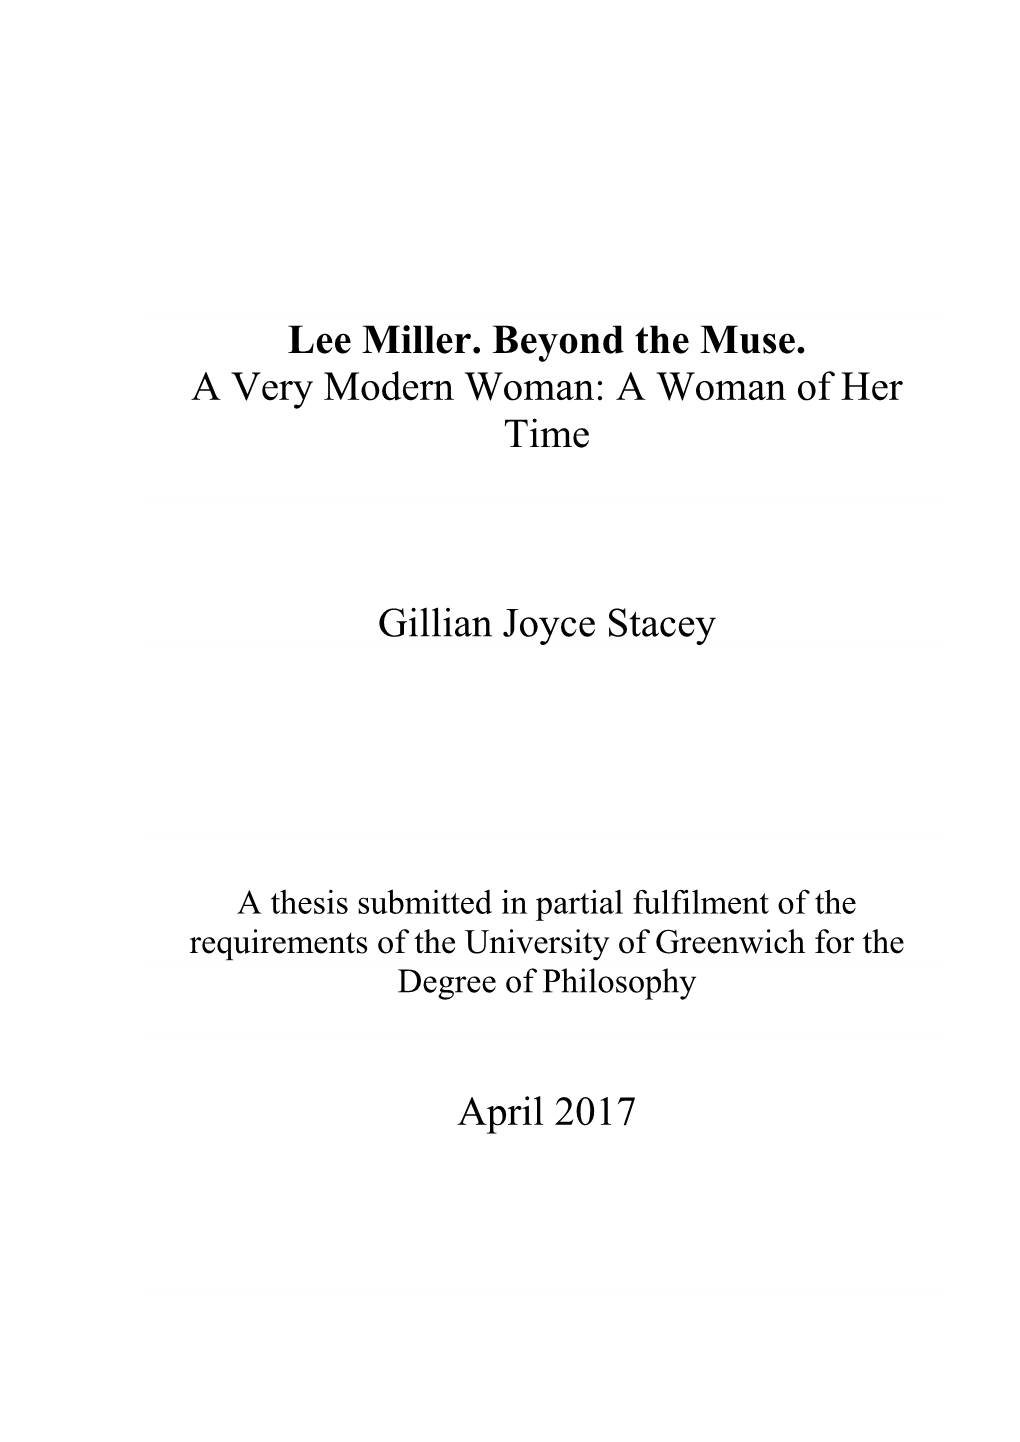 Lee Miller. Beyond the Muse. a Very Modern Woman: a Woman of Her Time Gillian Joyce Stacey April 2017